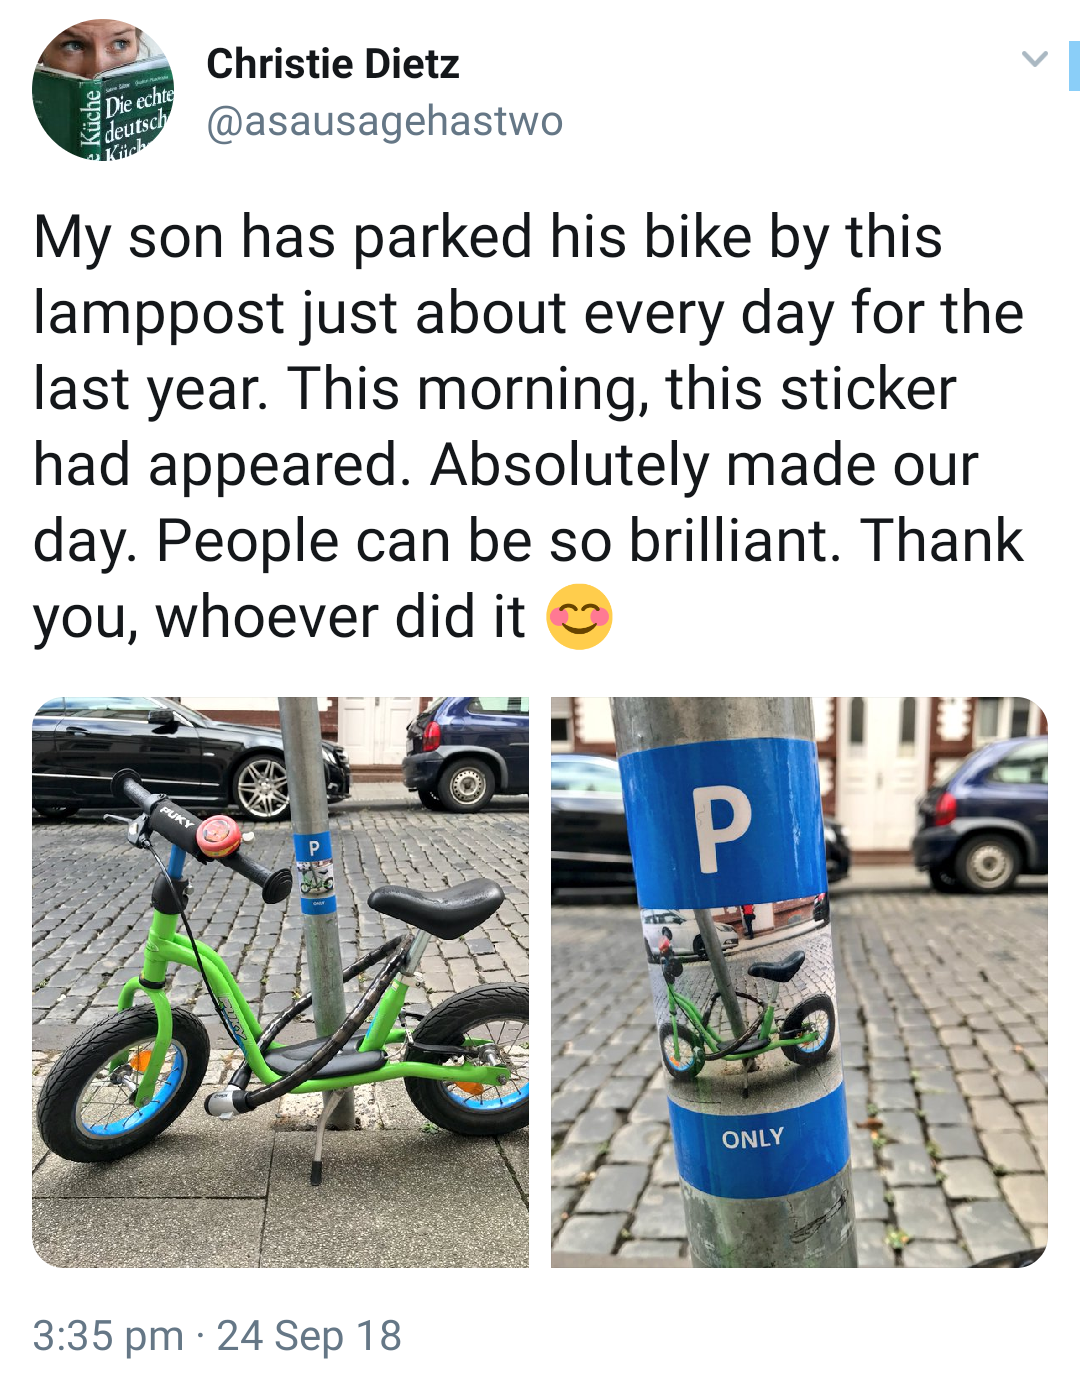 Bicycle - Christie Dietz My son has parked his bike by this lamppost just about every day for the last year. This morning, this sticker had appeared. Absolutely made our day. People can be so brilliant. Thank you, whoever did it 24 Sep 18